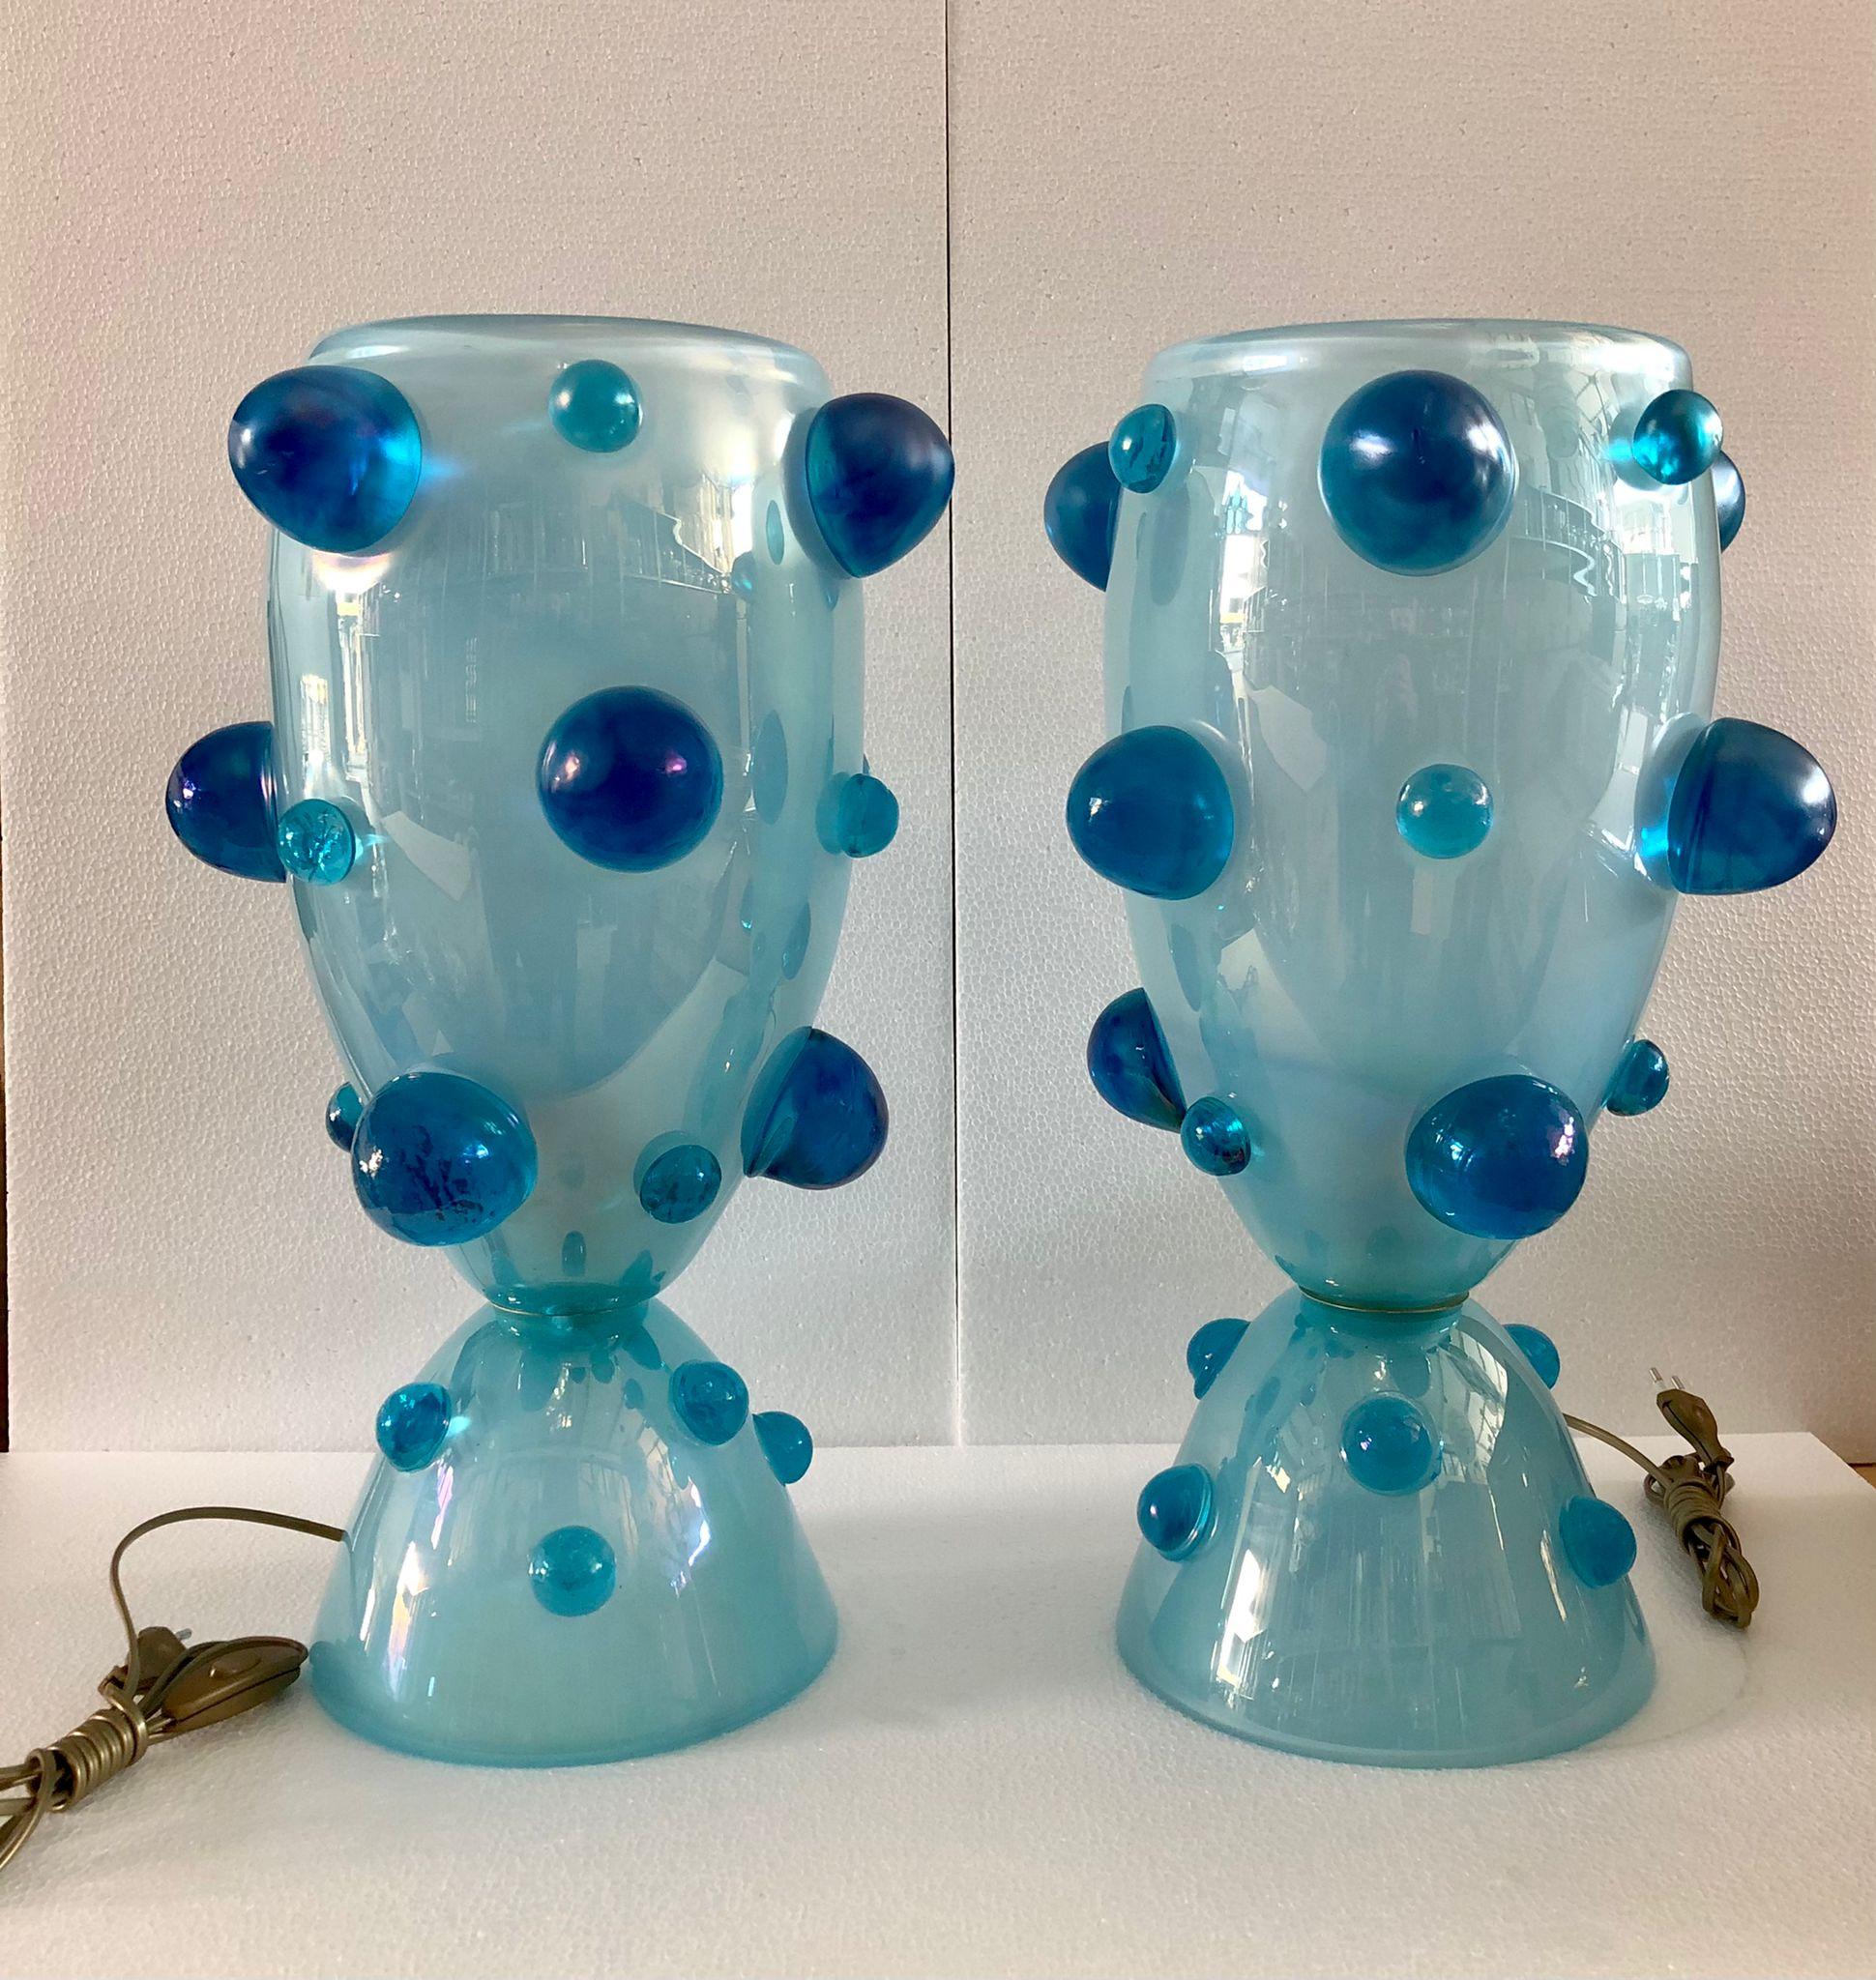 Splendid Murano table lamps punched Barovier & Toso. A supreme light blue color. Stylish and very special design.

The table lamps are composed of a large upper cup, on which differently shaped glass drops are applied hot. Under a smaller cup